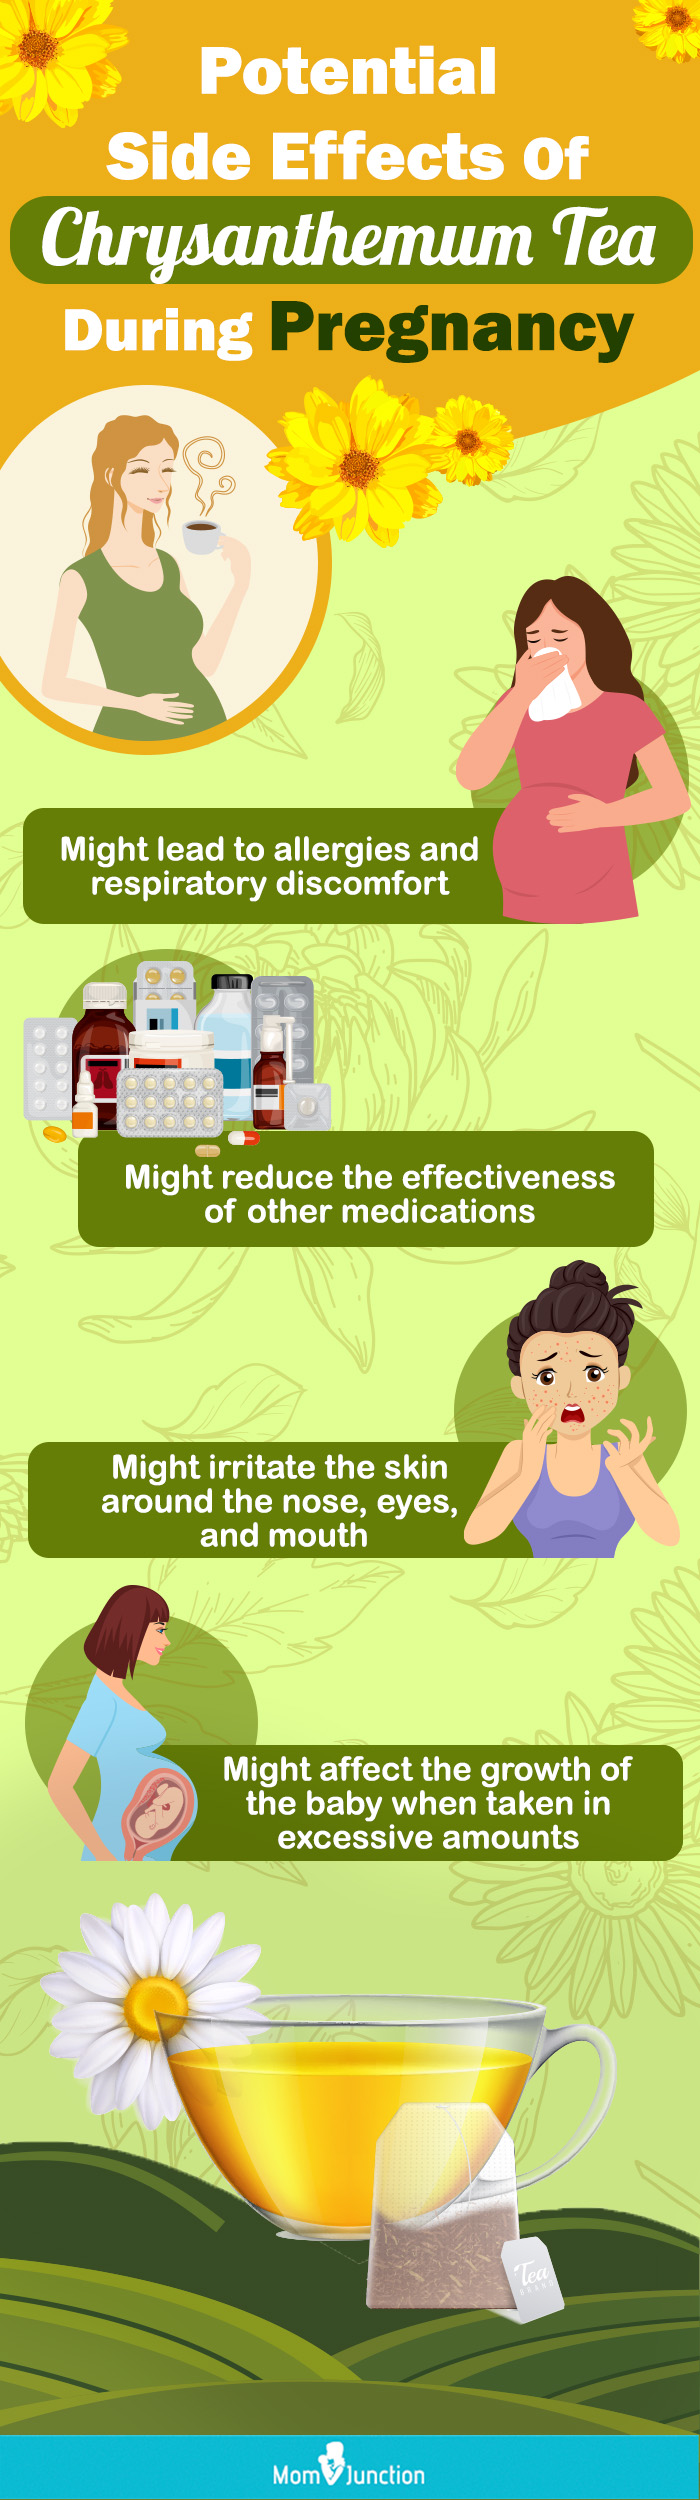 potential side effects of chrysanthemum tea during pregnancy [infographic]